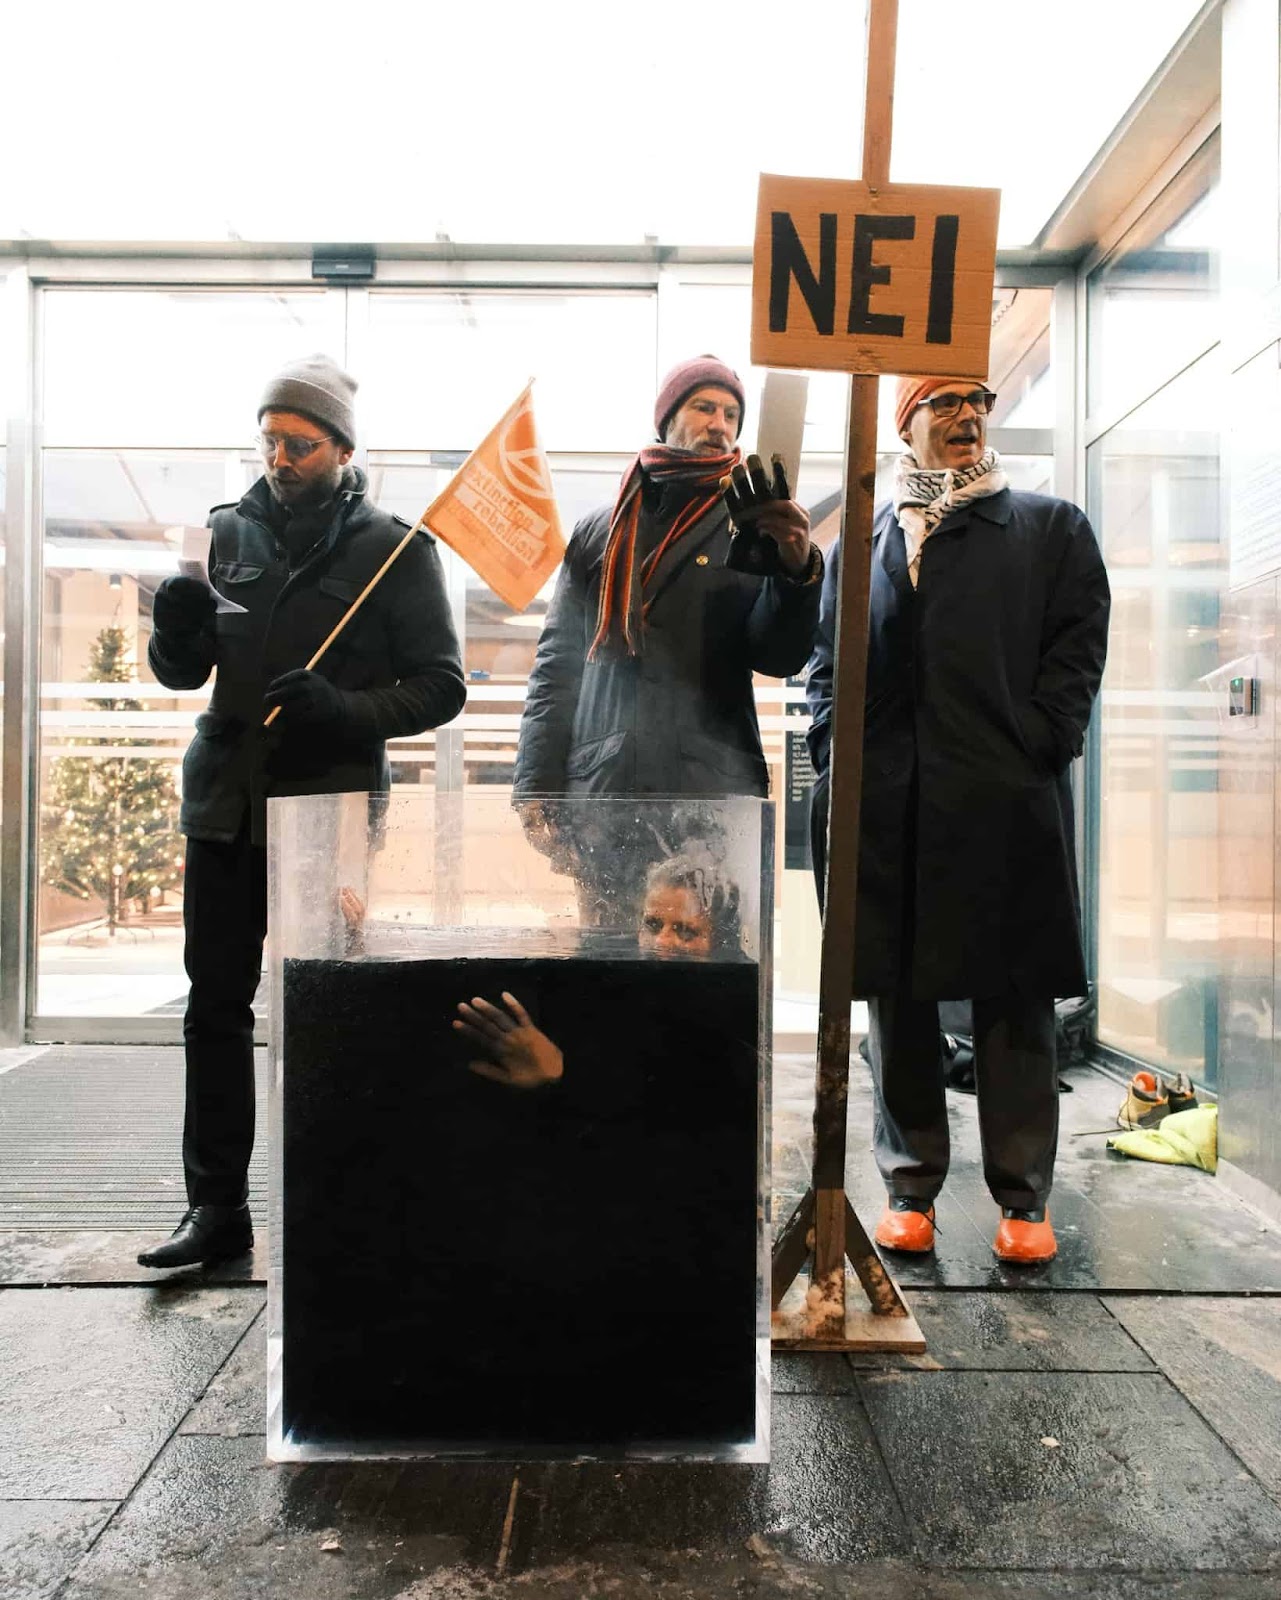 Rebels stand outside a workplace entrance with a sign that says NEI (No) and a rebel sat submerged in a glass tank of black liquid